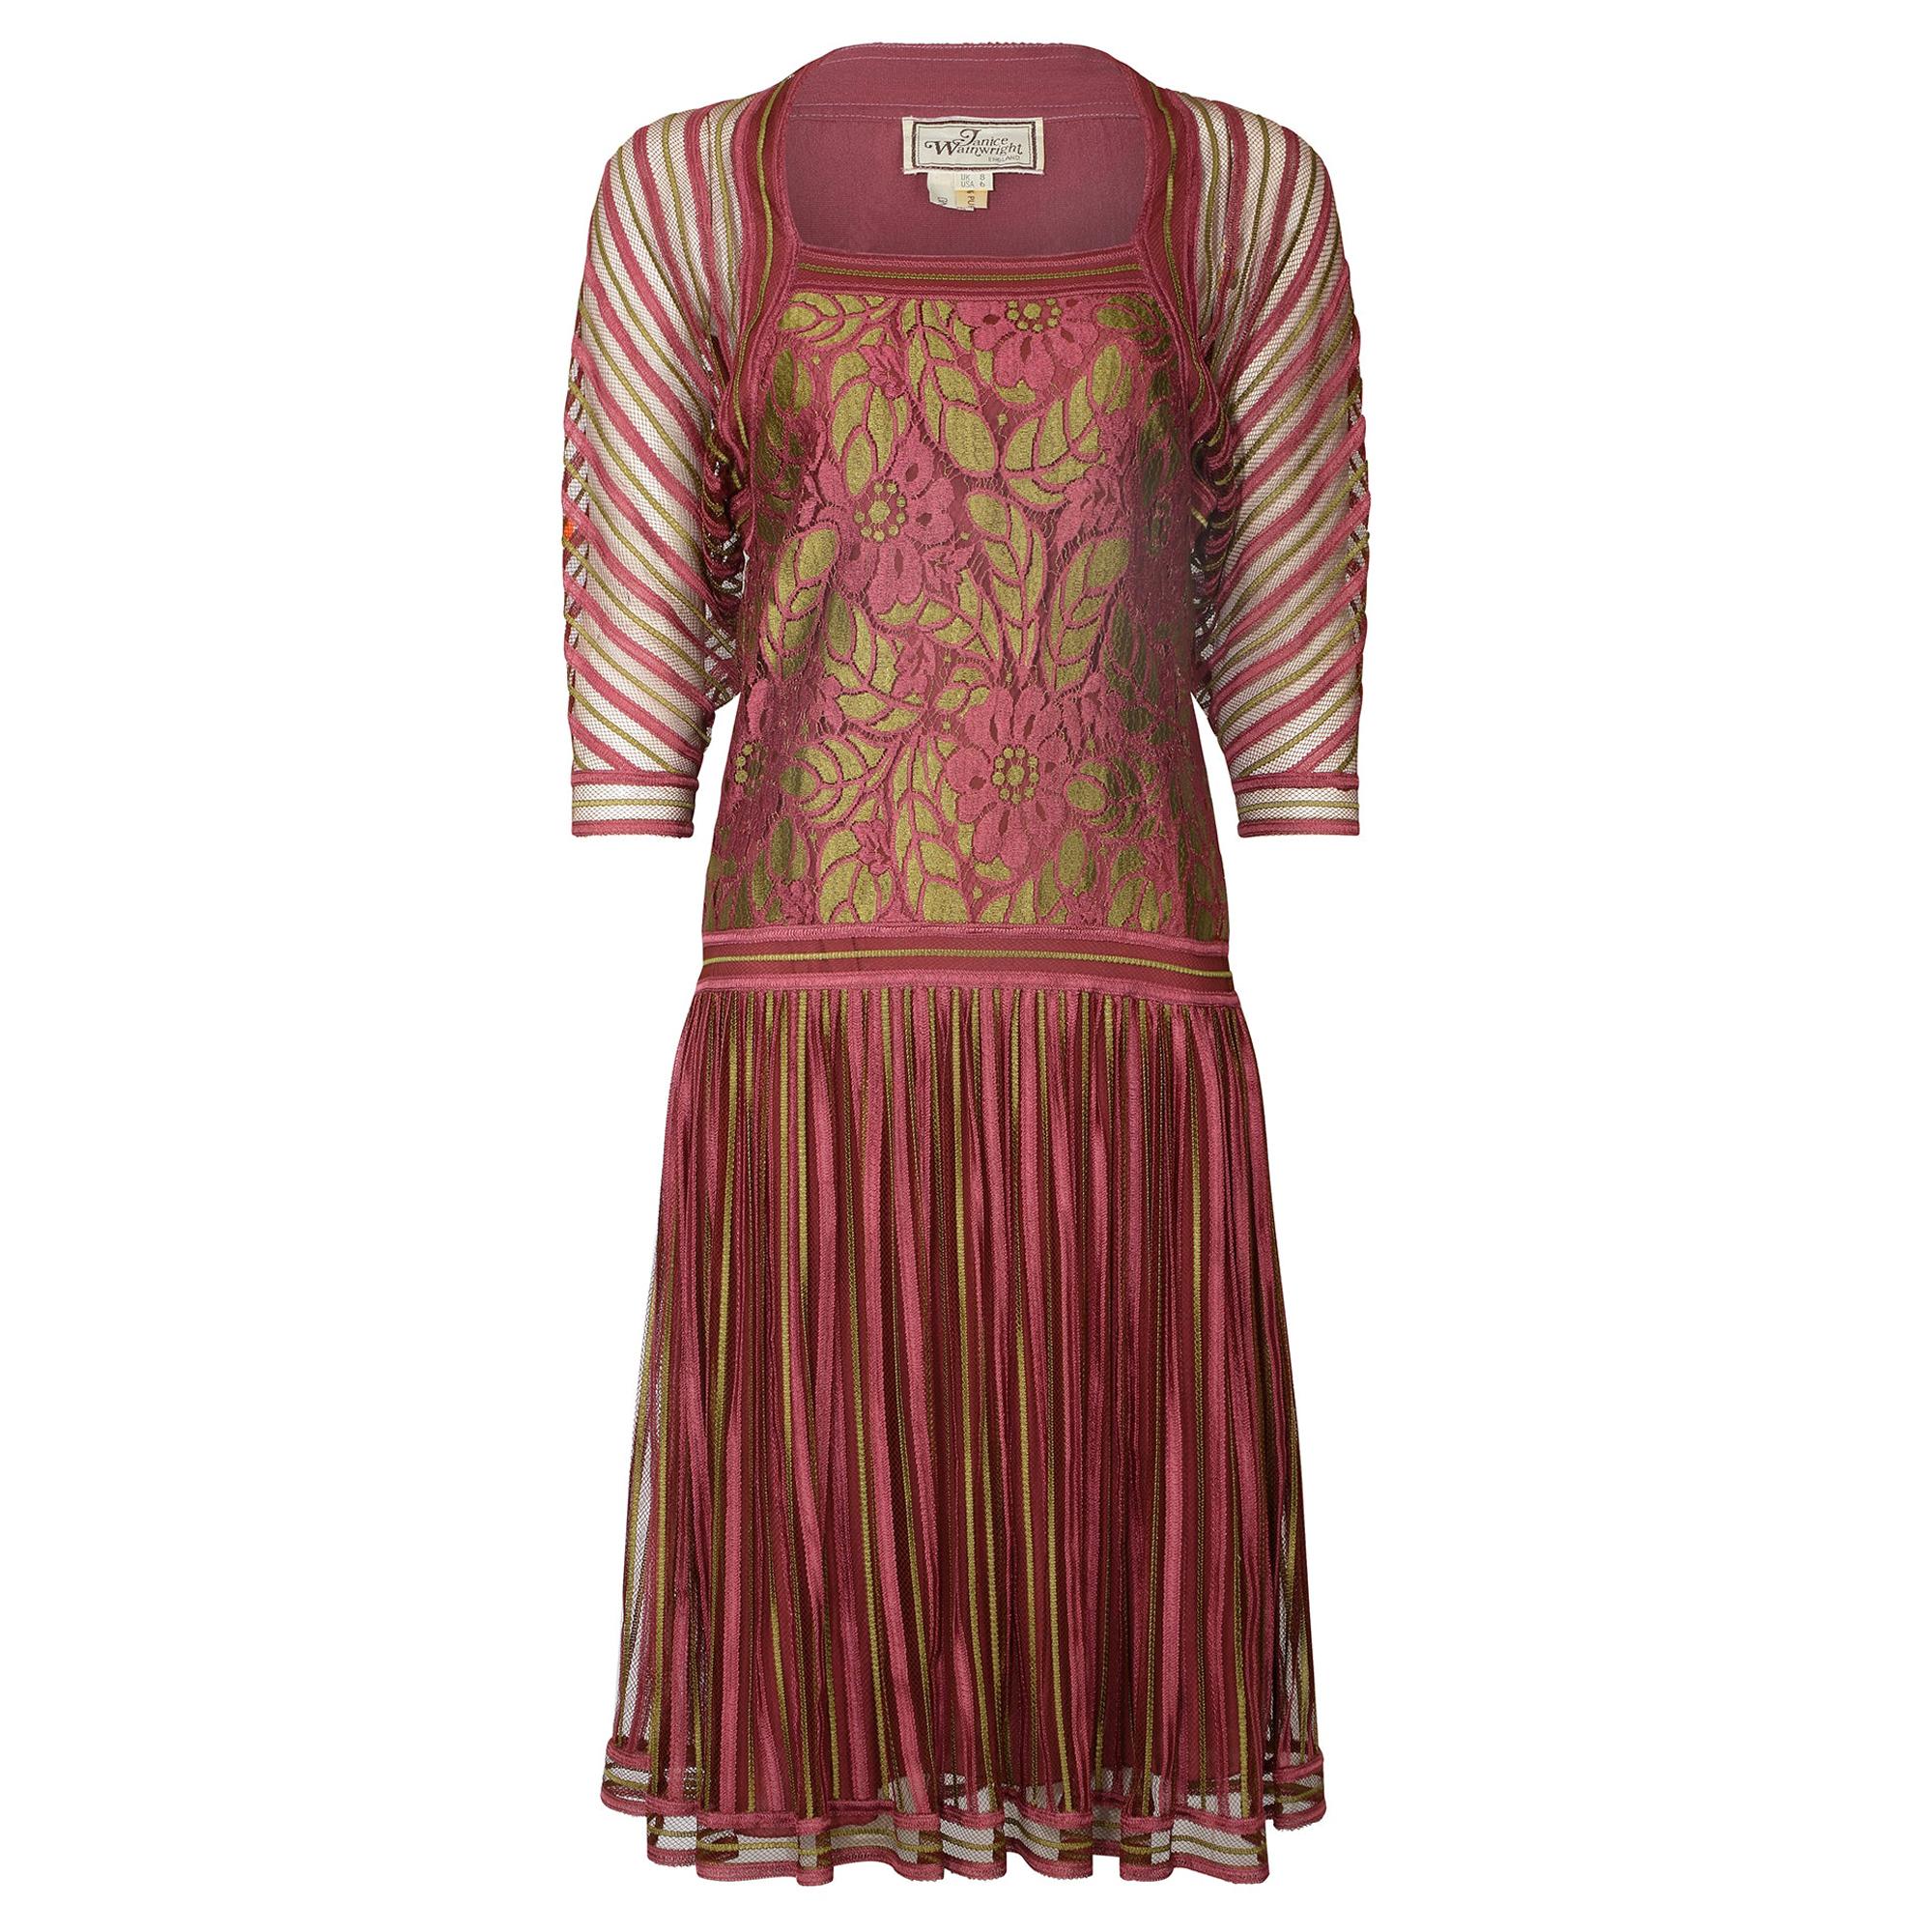  1970s Janice Wainwright Pink and Gold 1920s Style Flapper Dress